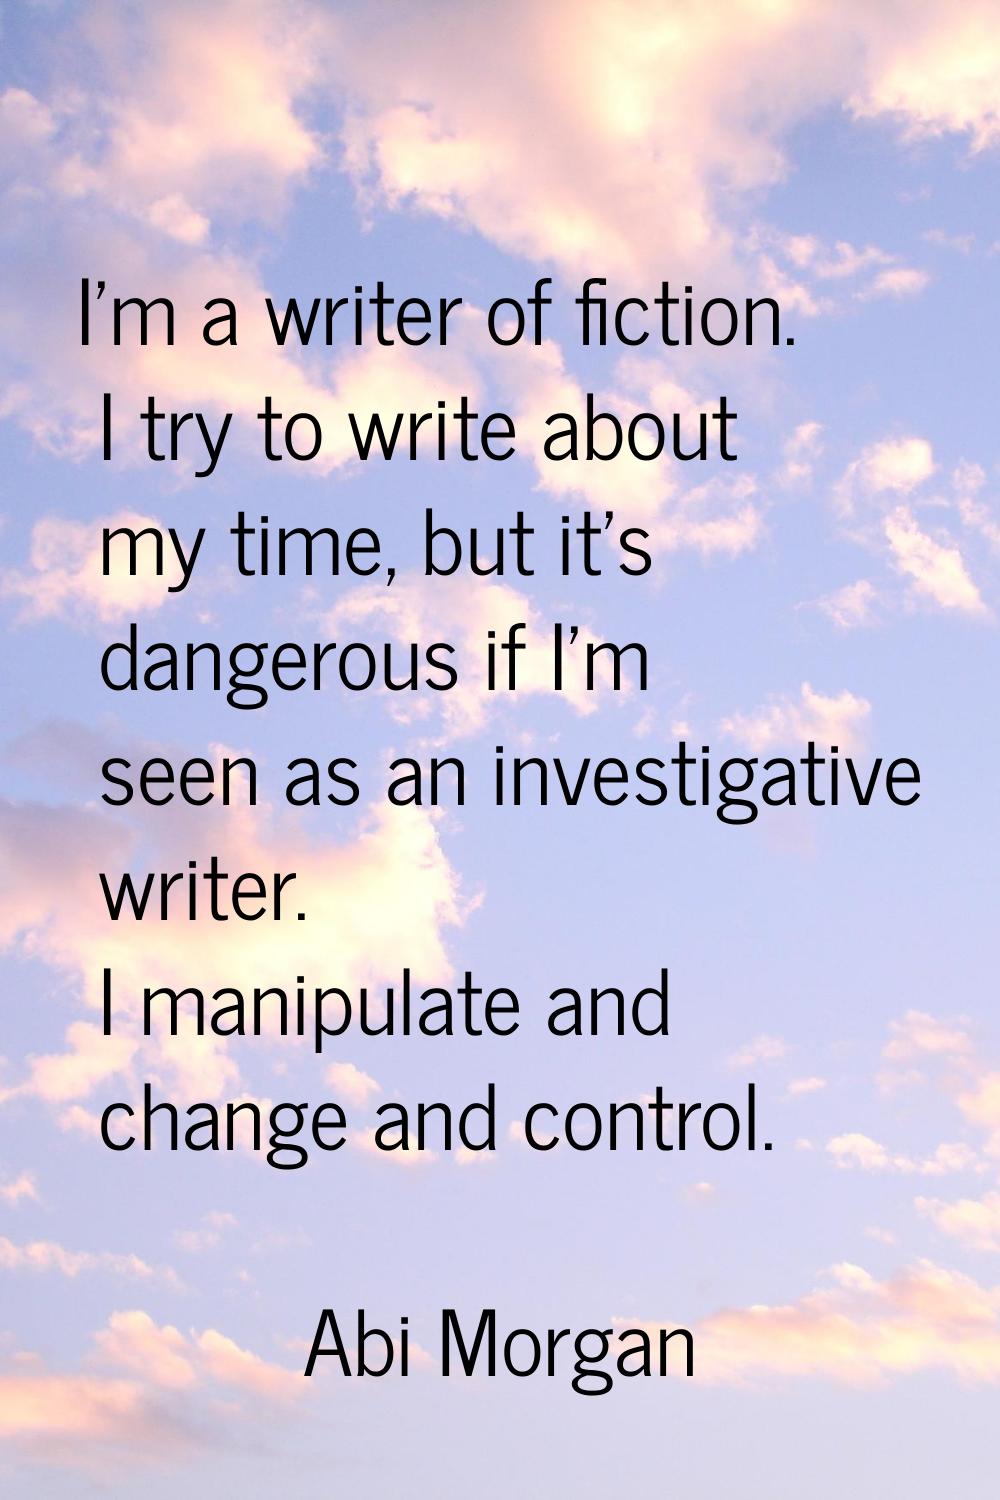 I'm a writer of fiction. I try to write about my time, but it's dangerous if I'm seen as an investi